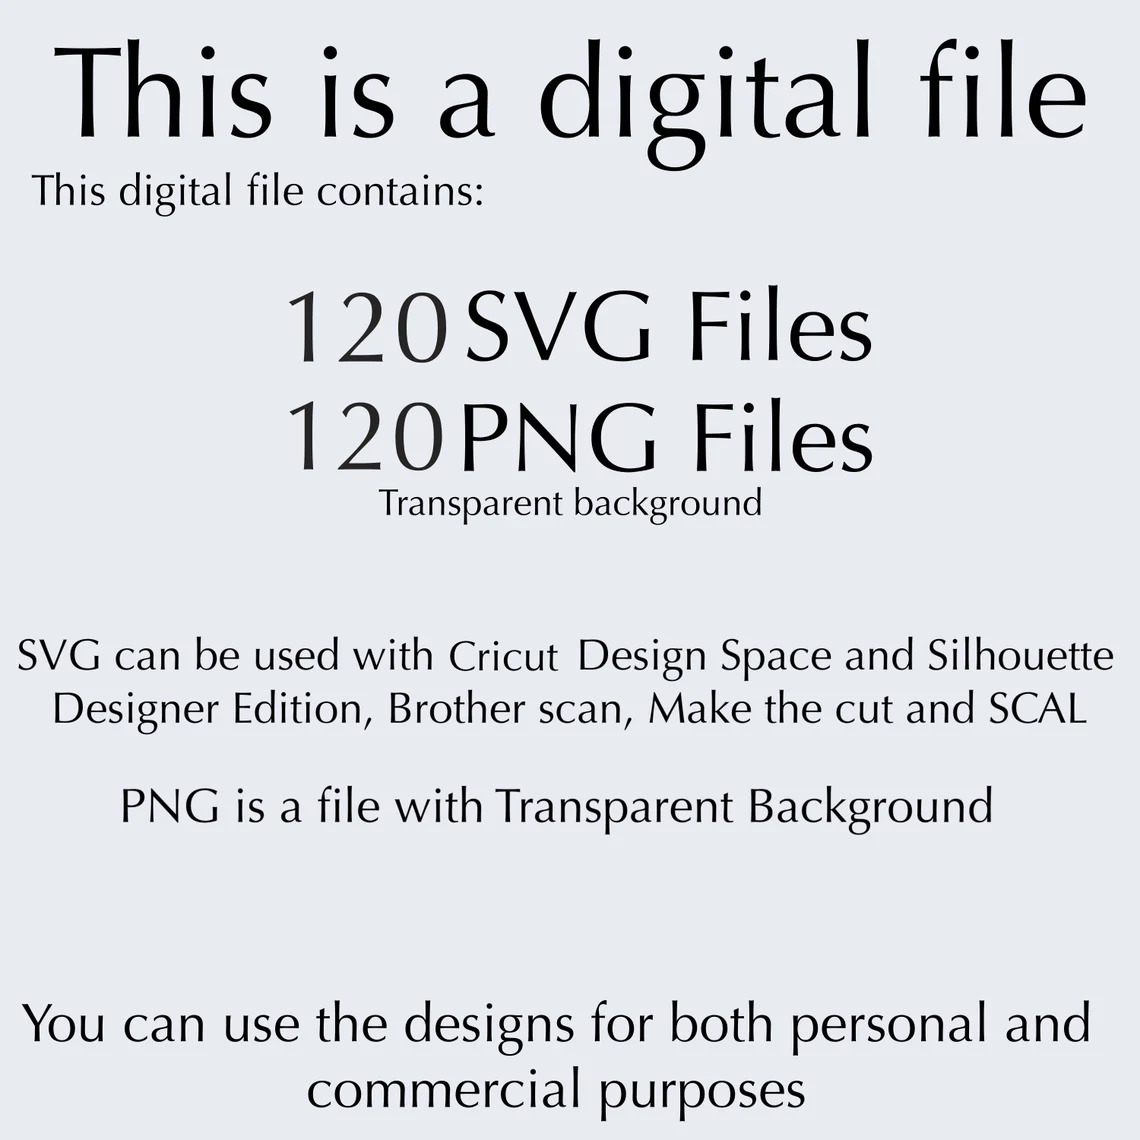 Description of the files included in the package.